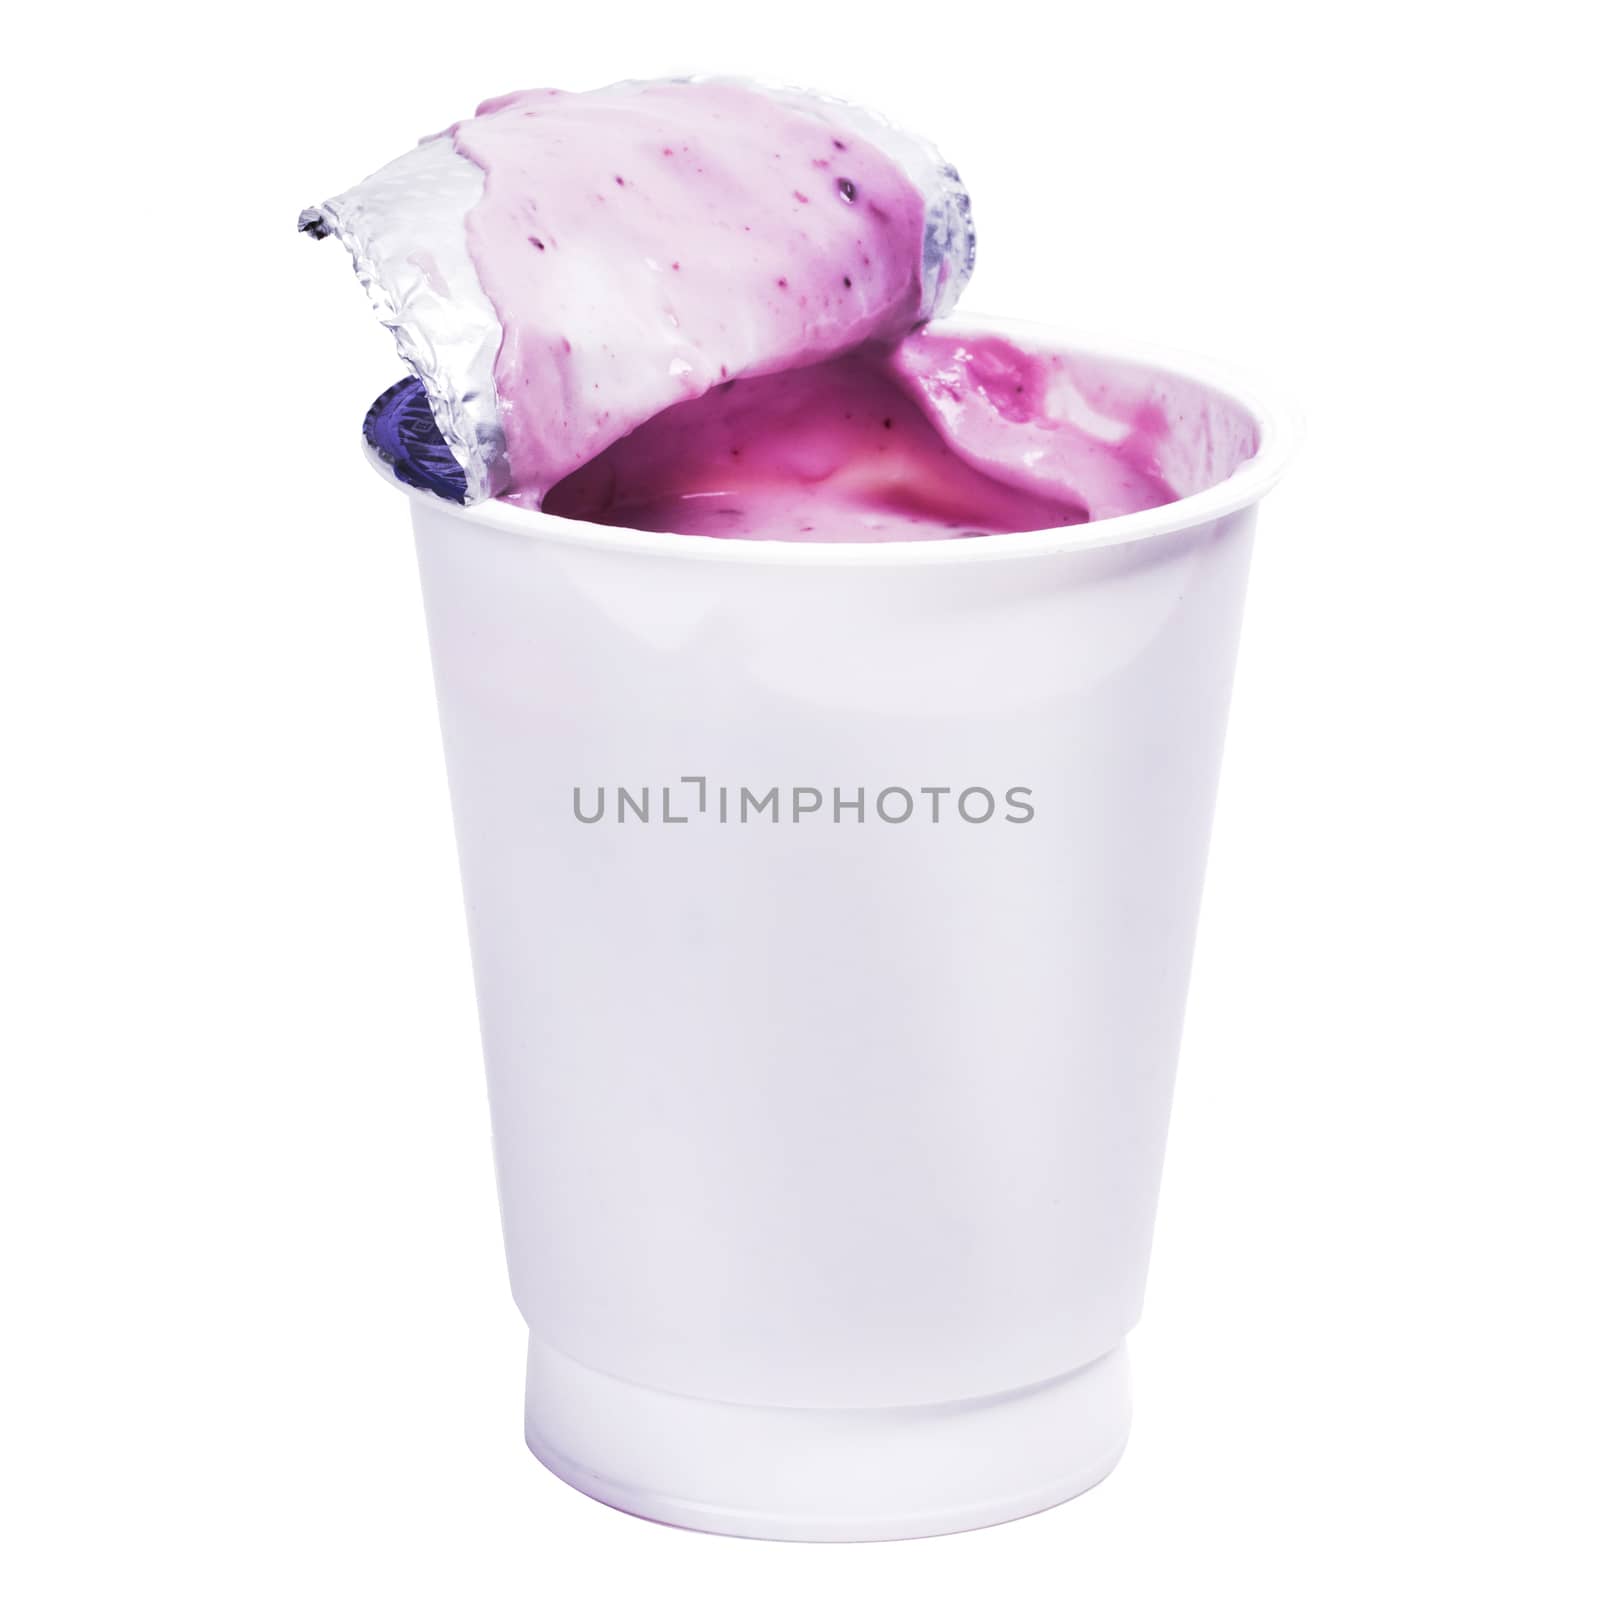 Delicious blueberry yoghurt on a white background